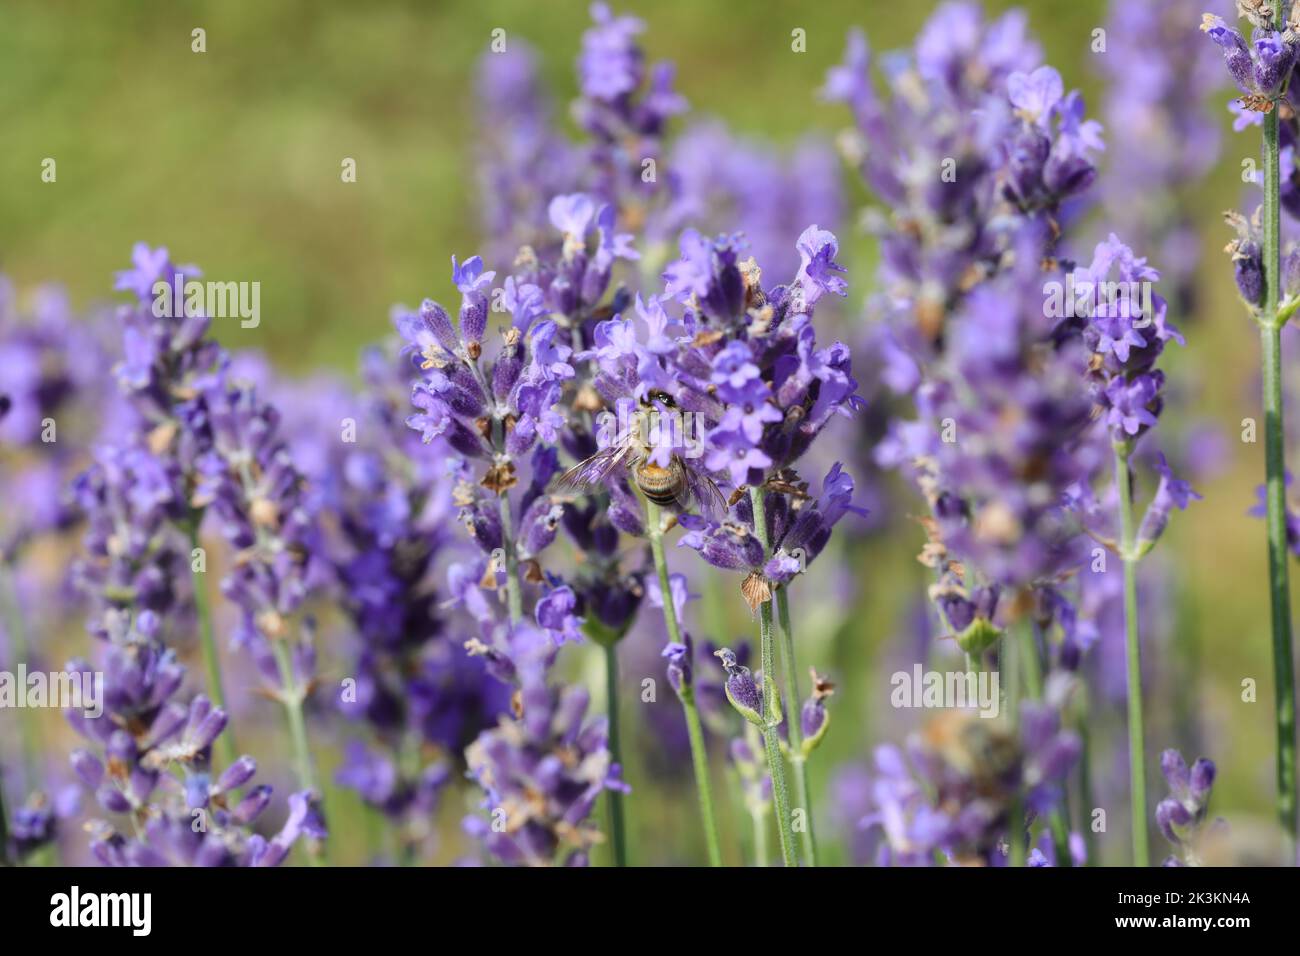 Bee insect sucking nectar from fragrant lavender flowers useful for pollinating other plants Stock Photo